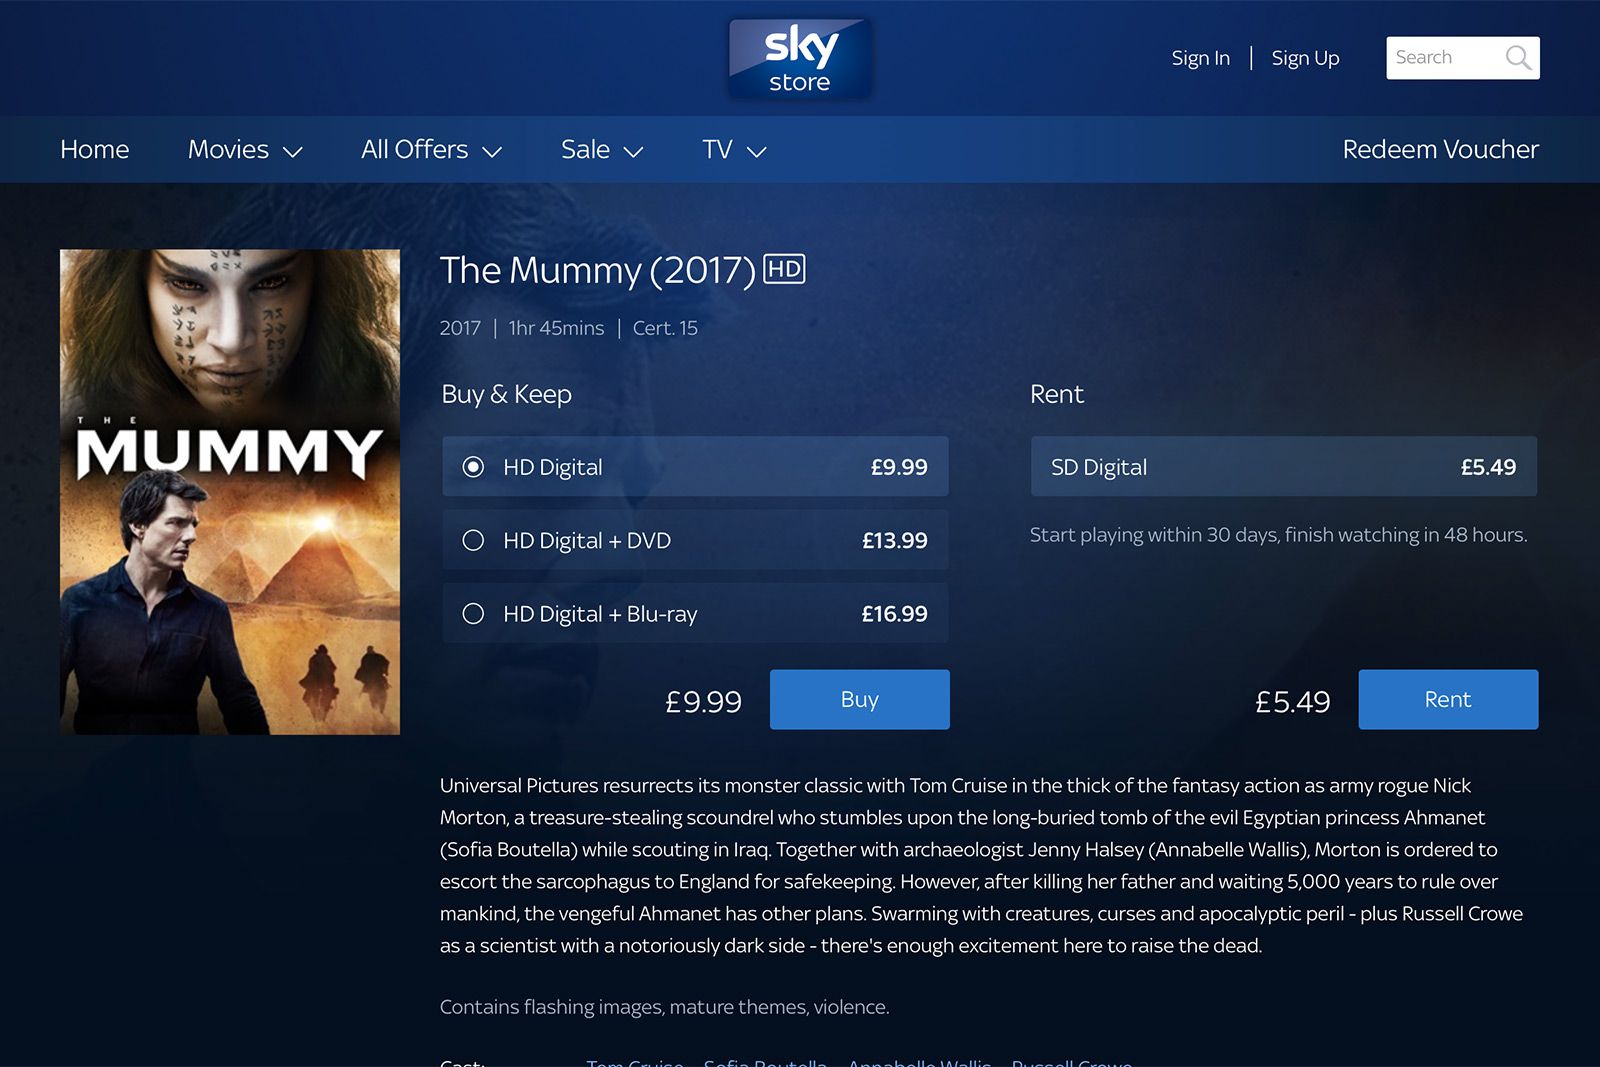 Sky Store now offers Blu-rays with digital movie purchases too image 1